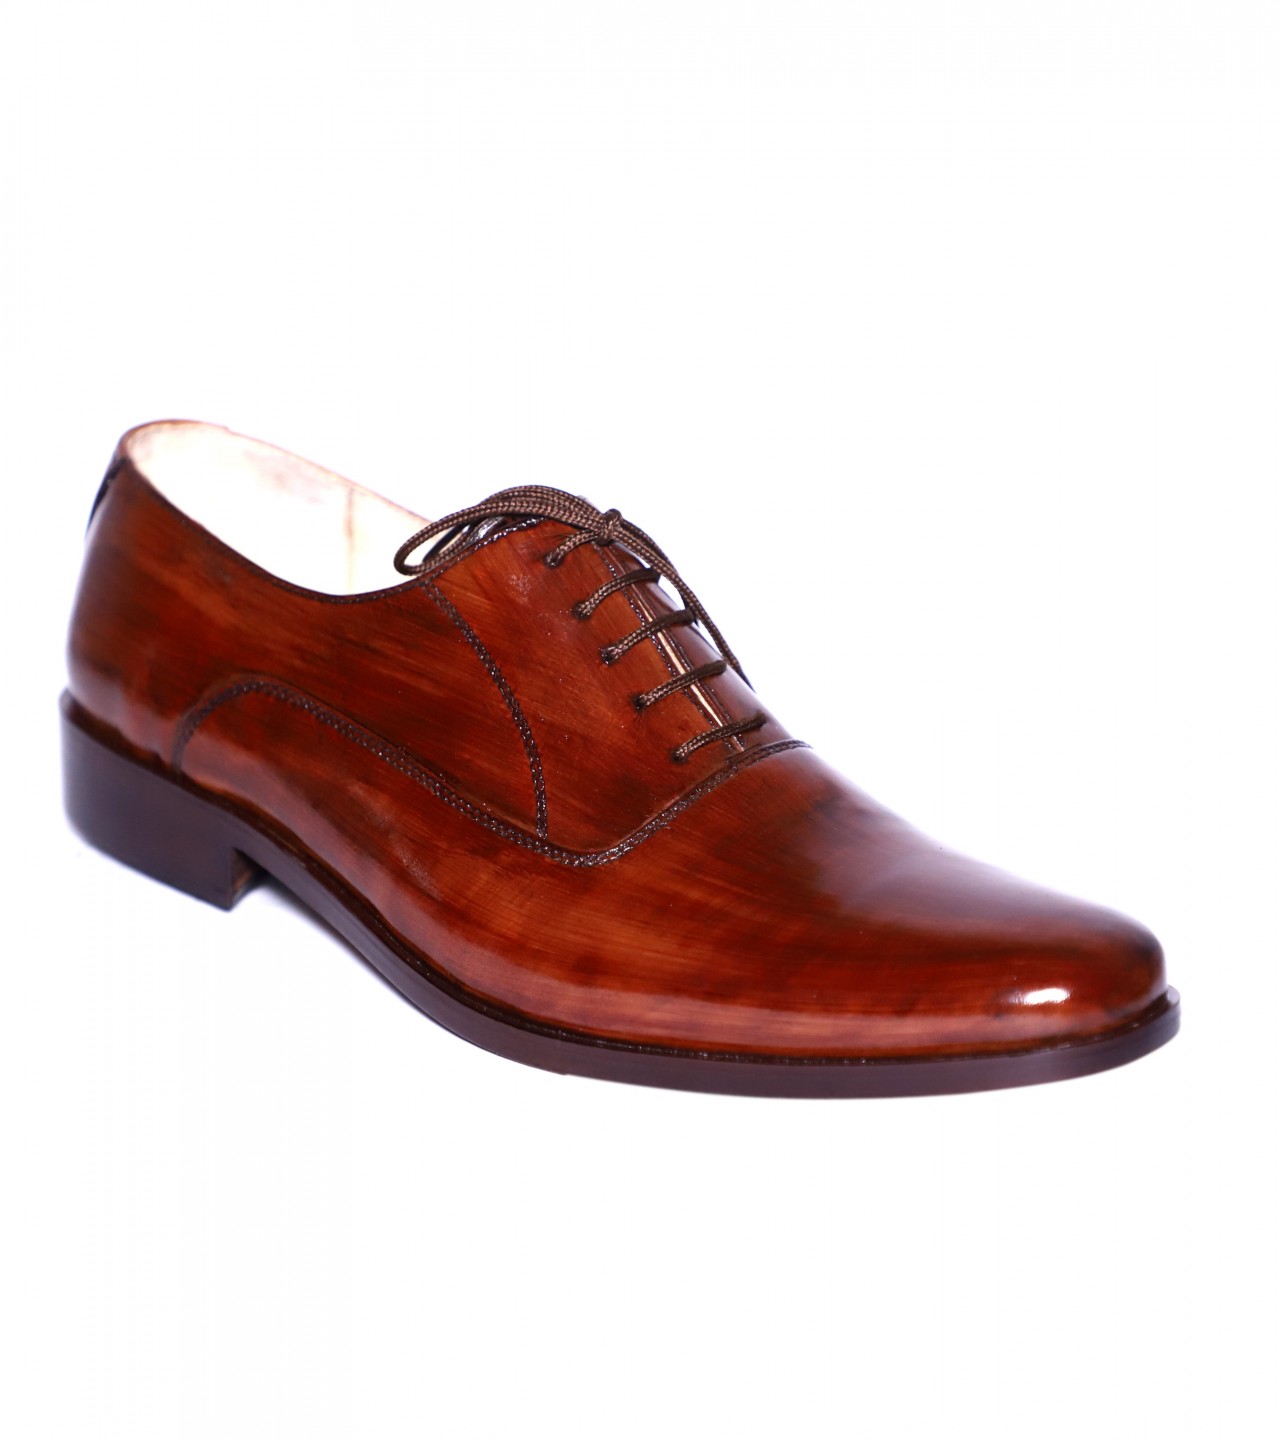 MEN'S FORMAL SHOES HAND PATINA FINISH 39-45